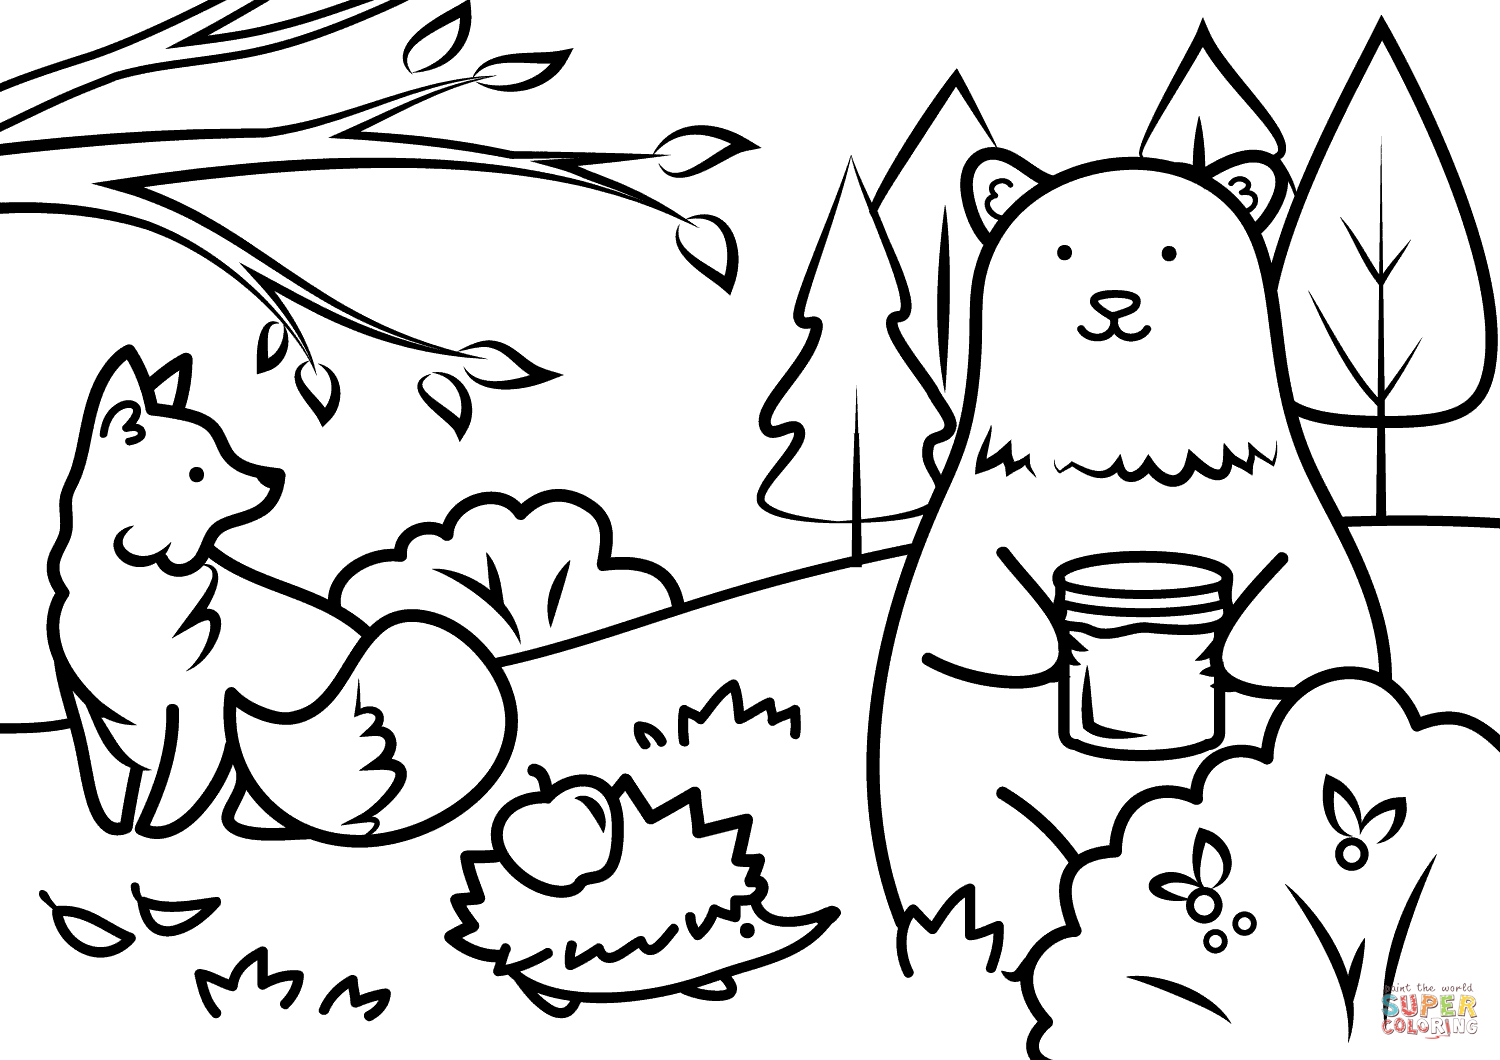 Autumn Animals Coloring Page | Free Printable Coloring Pages - Free Printable Autumn Coloring Sheets